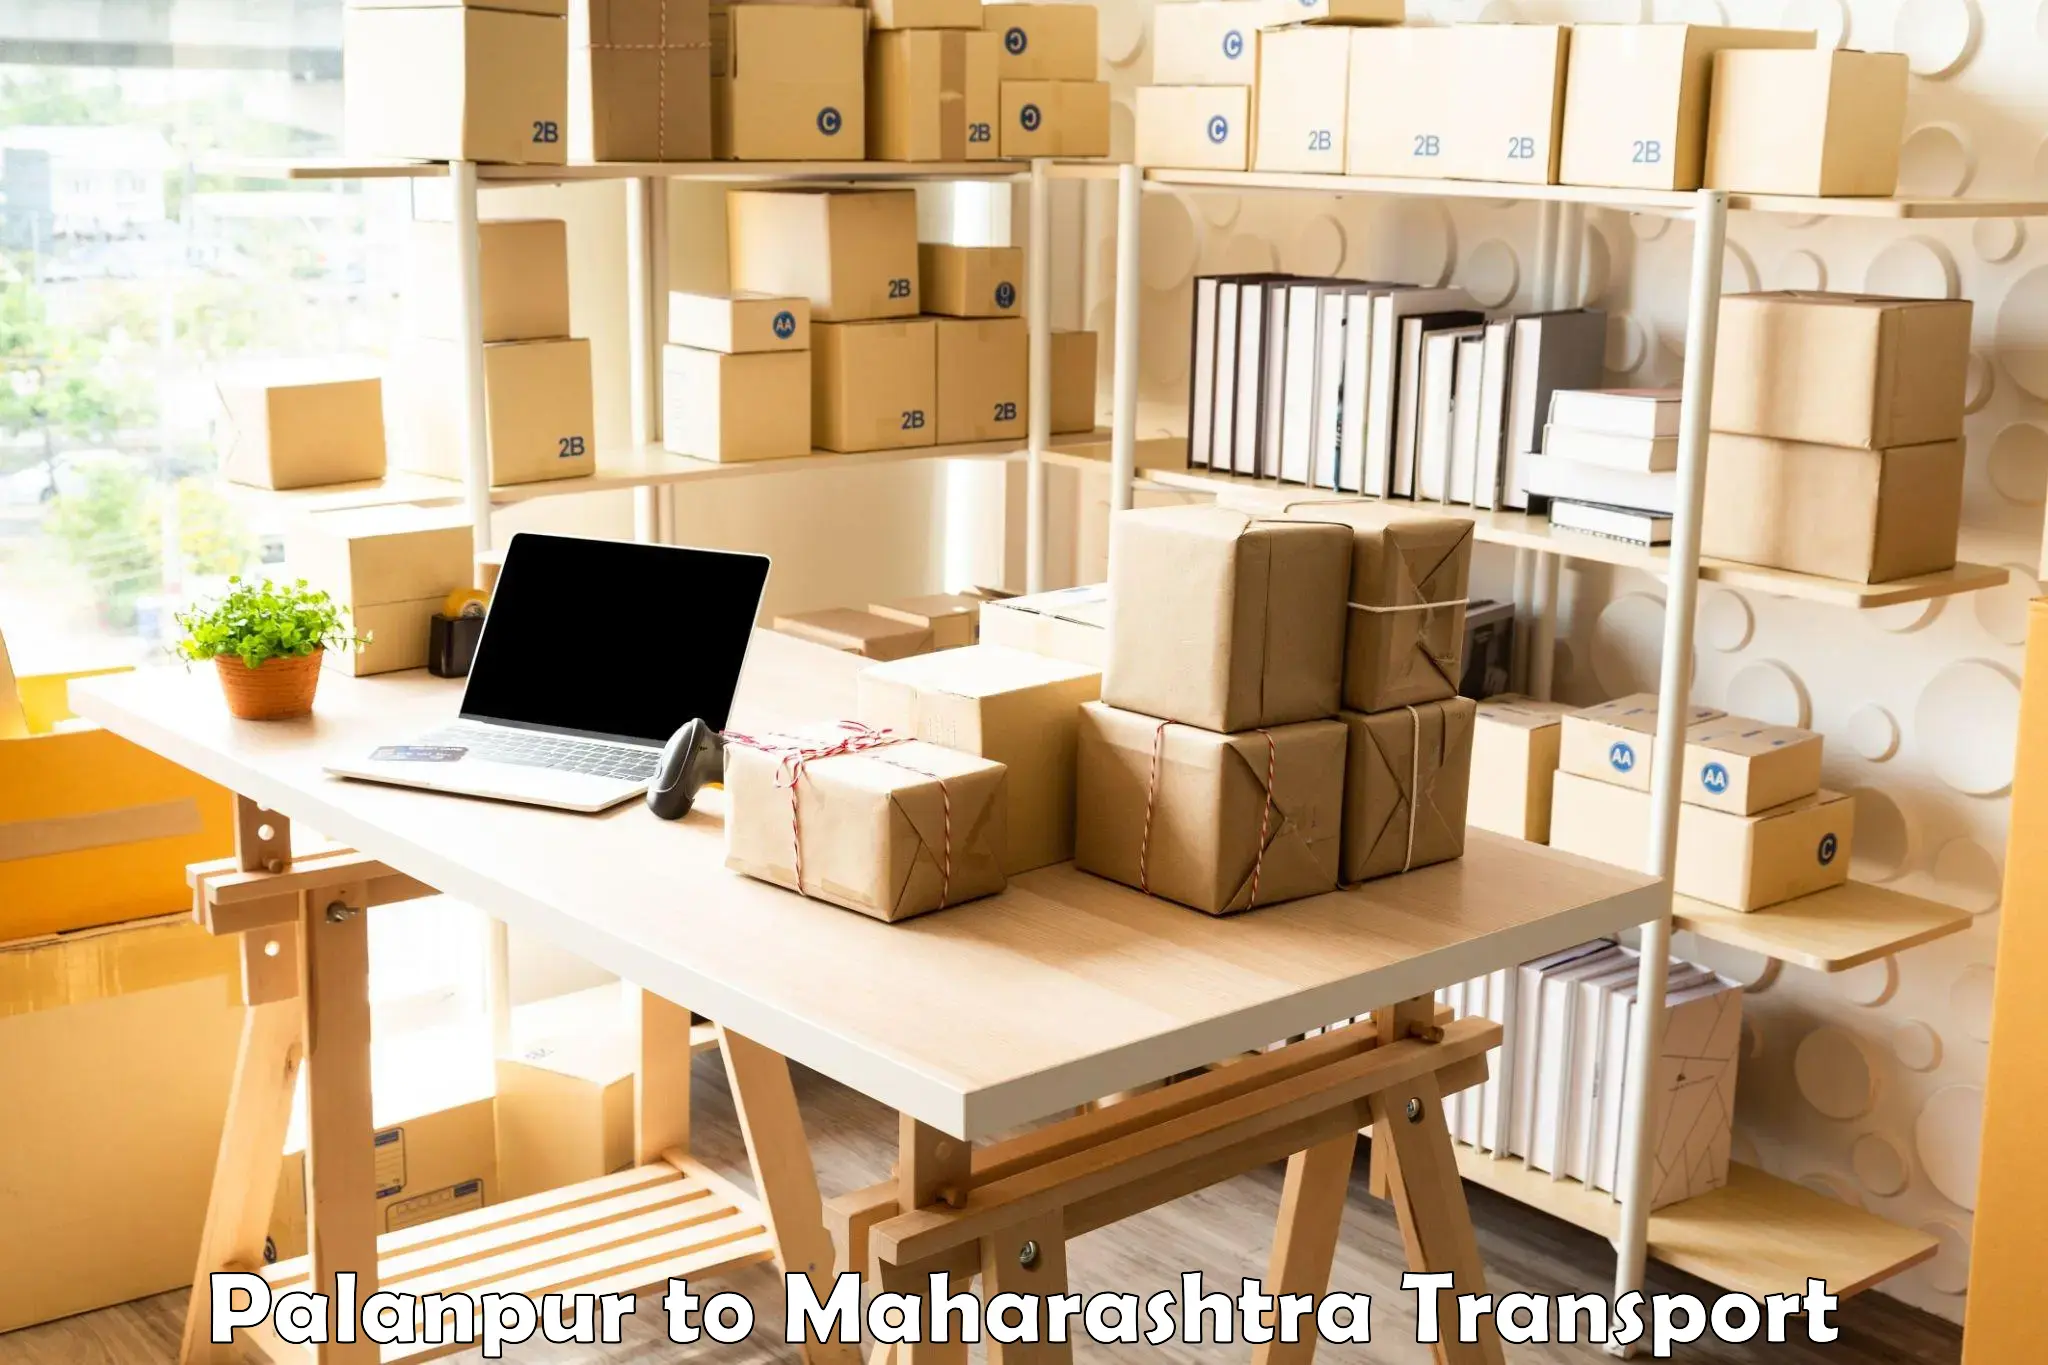 Goods delivery service Palanpur to Shrirampur